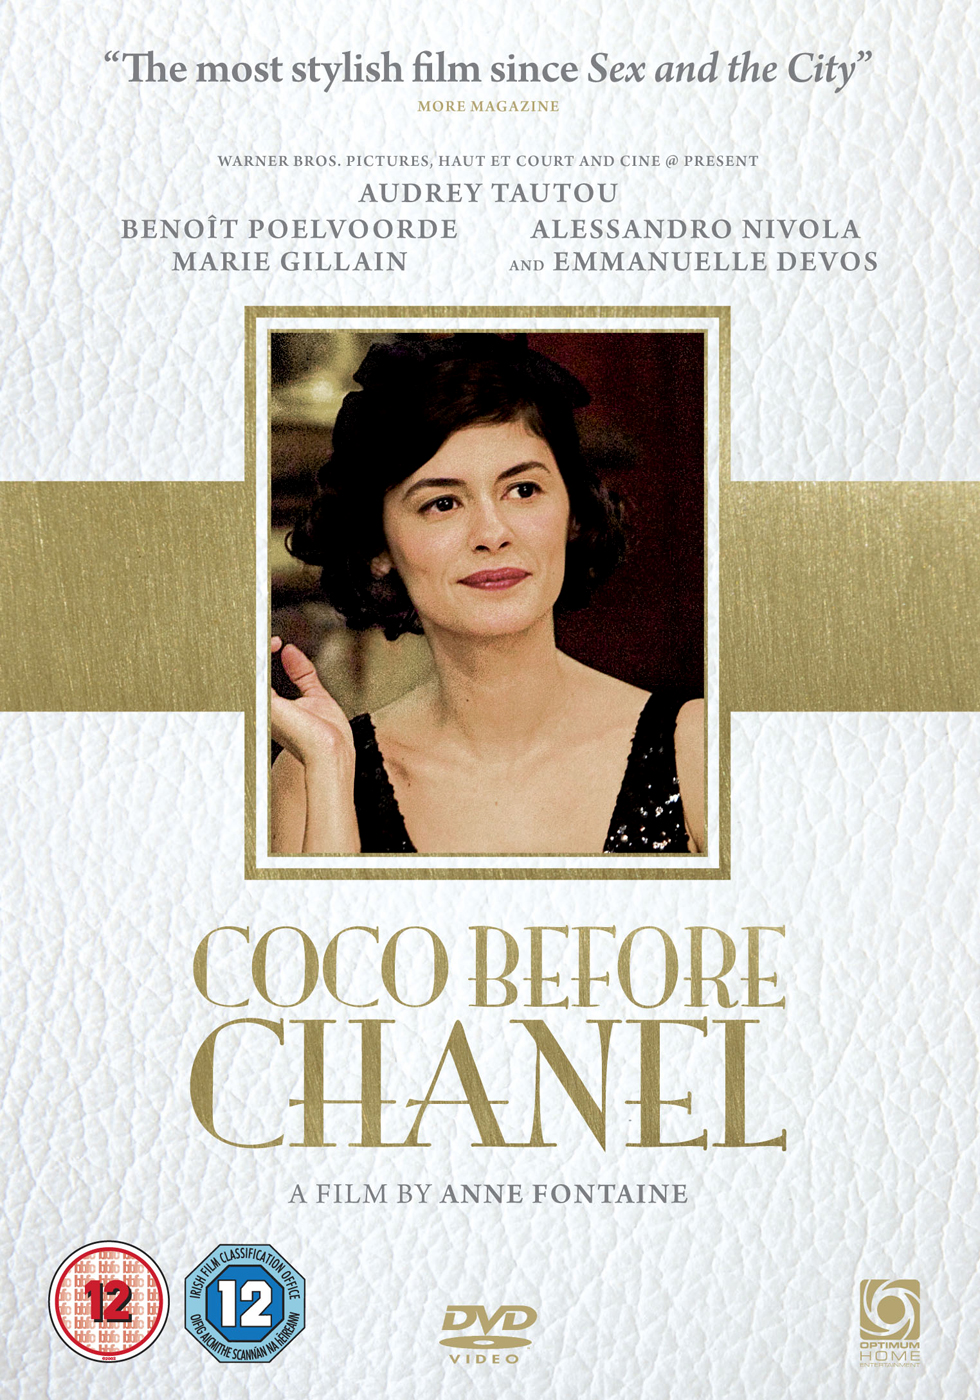 The Nancy Wilde Experience  Coco chanel fashion, Chanel fashion, Audrey  tautou